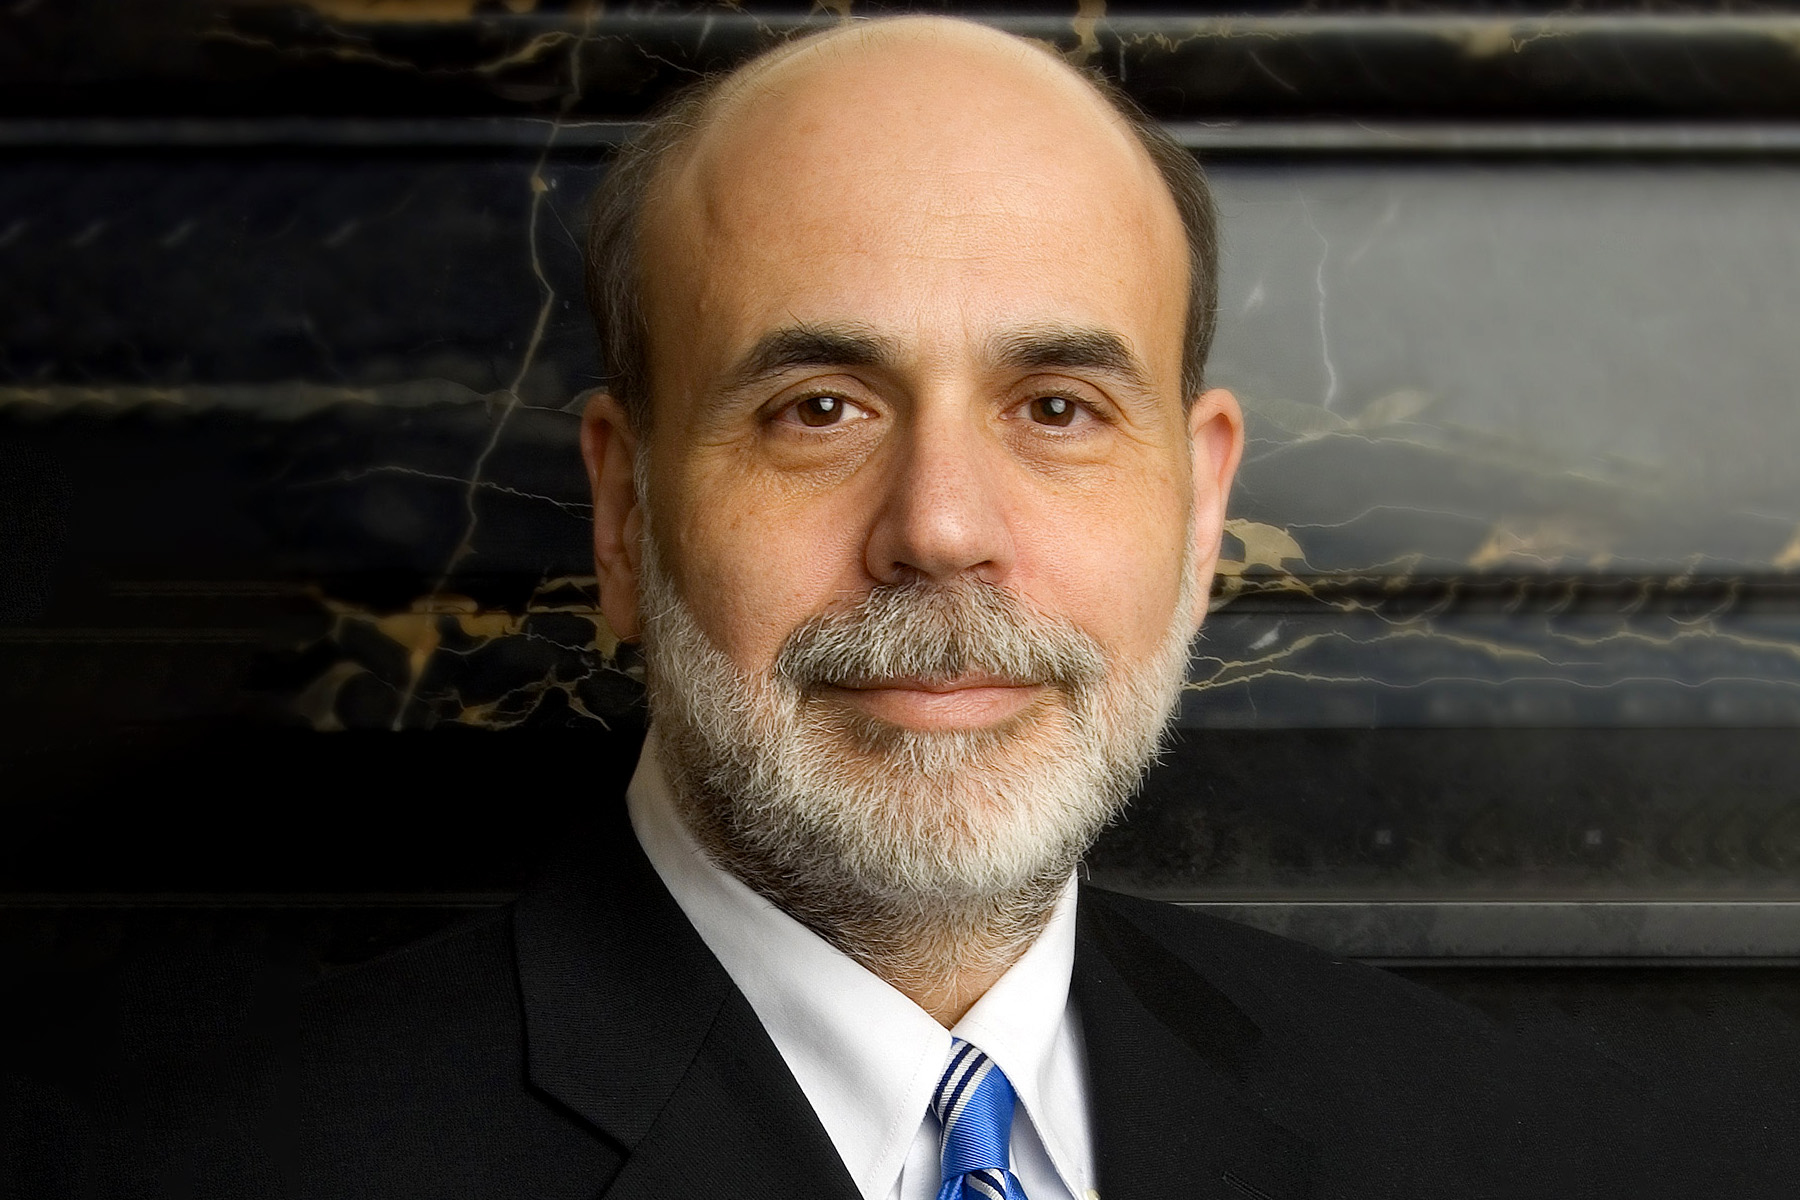 Ben Bernanke PhD ’79 has been awarded a share of the 2022 Nobel Prize in economic sciences. A former chair of the Federal Reserve Board, he is now a distinguished fellow in residence at the Brookings Institution. 